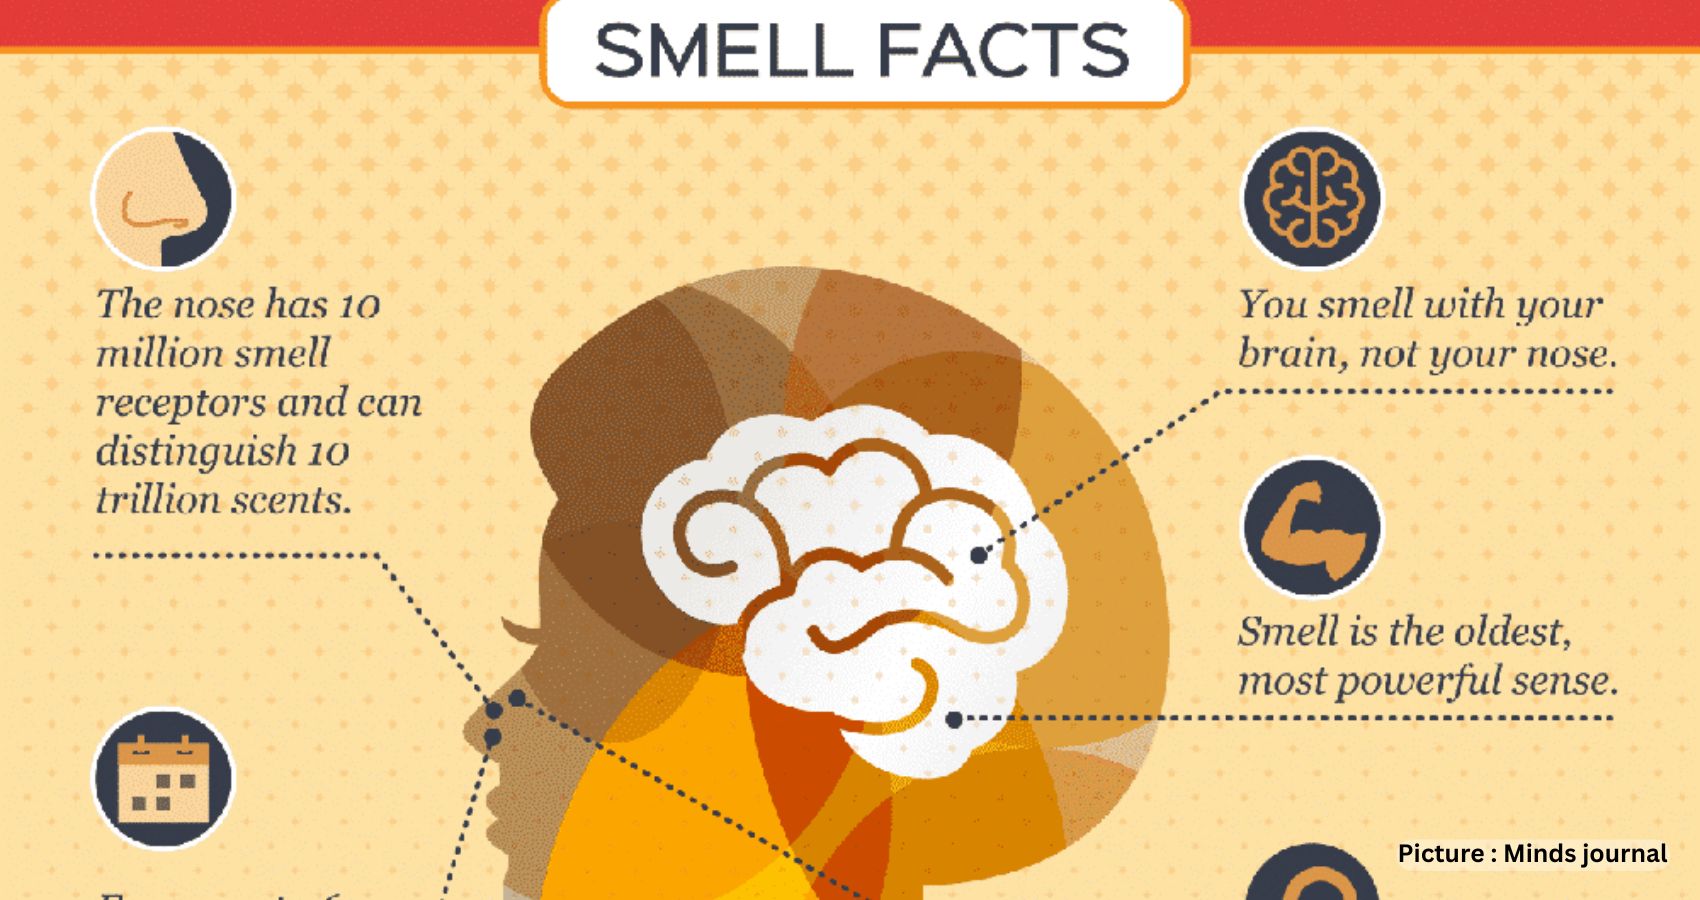 Sense Of Smell To Boost Energy And Mood